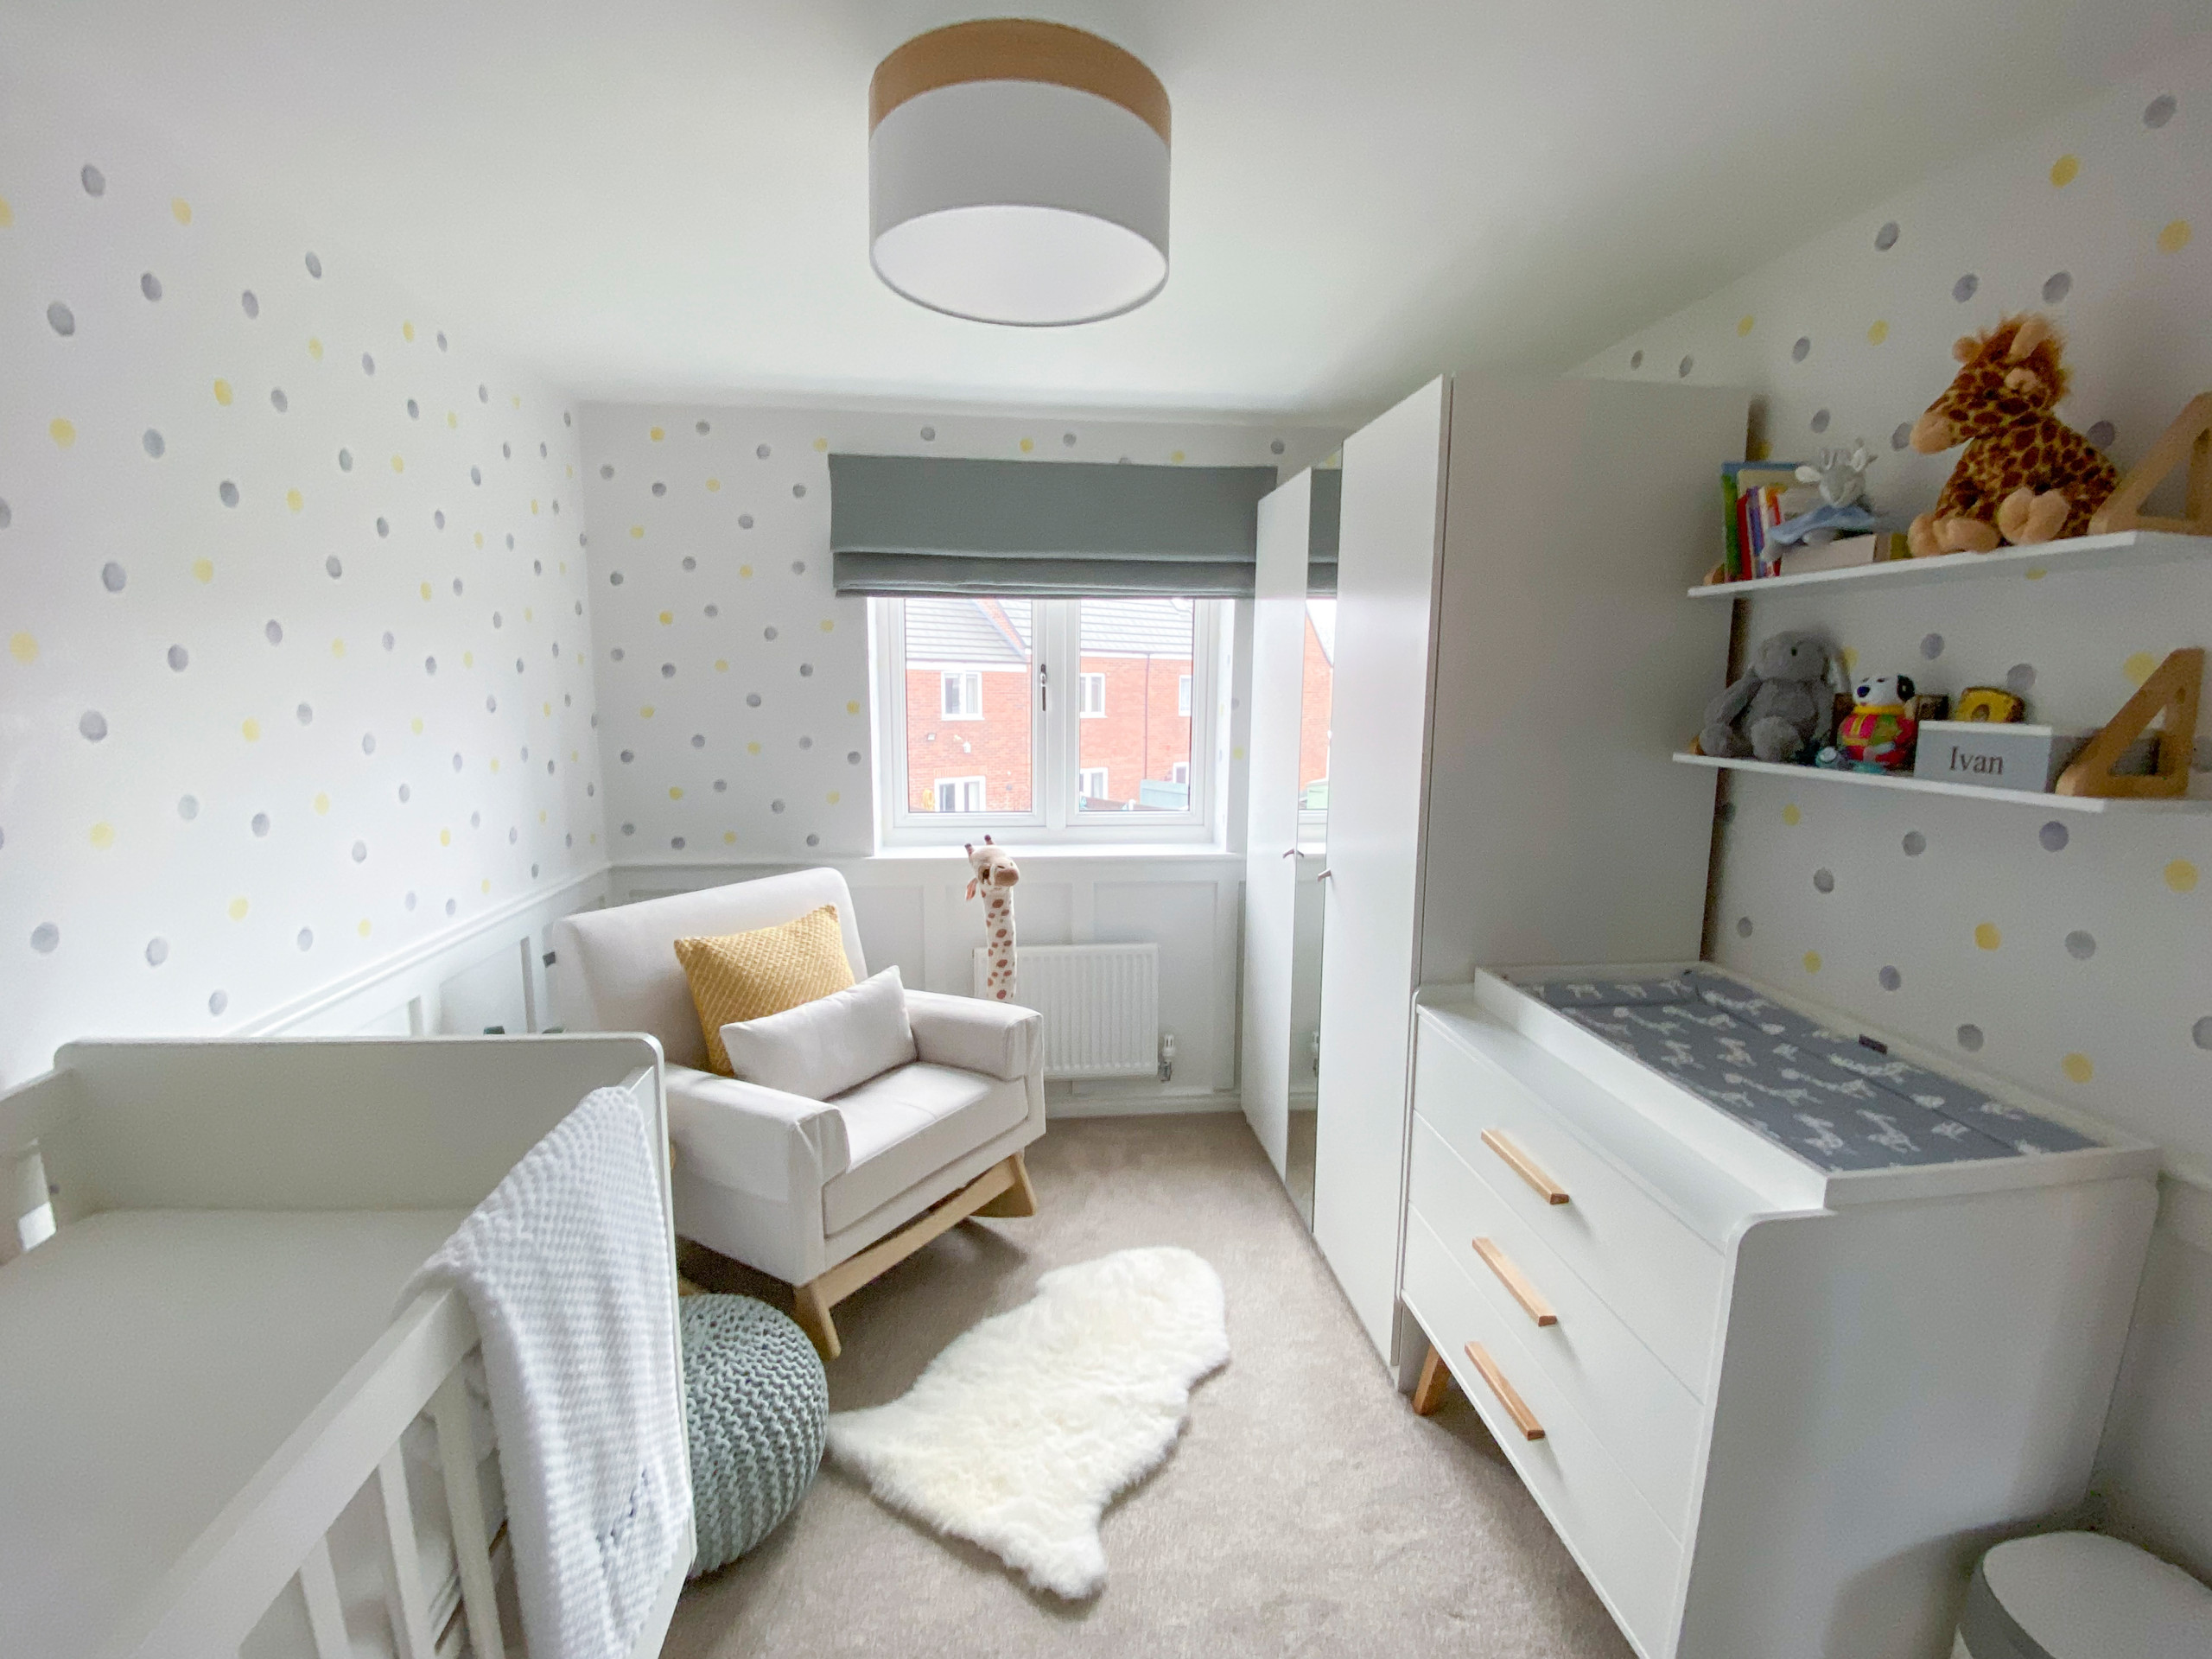 75 Beautiful Wall Paneling Nursery Pictures & Ideas - Style: Modern -  September, 2022 | Houzz